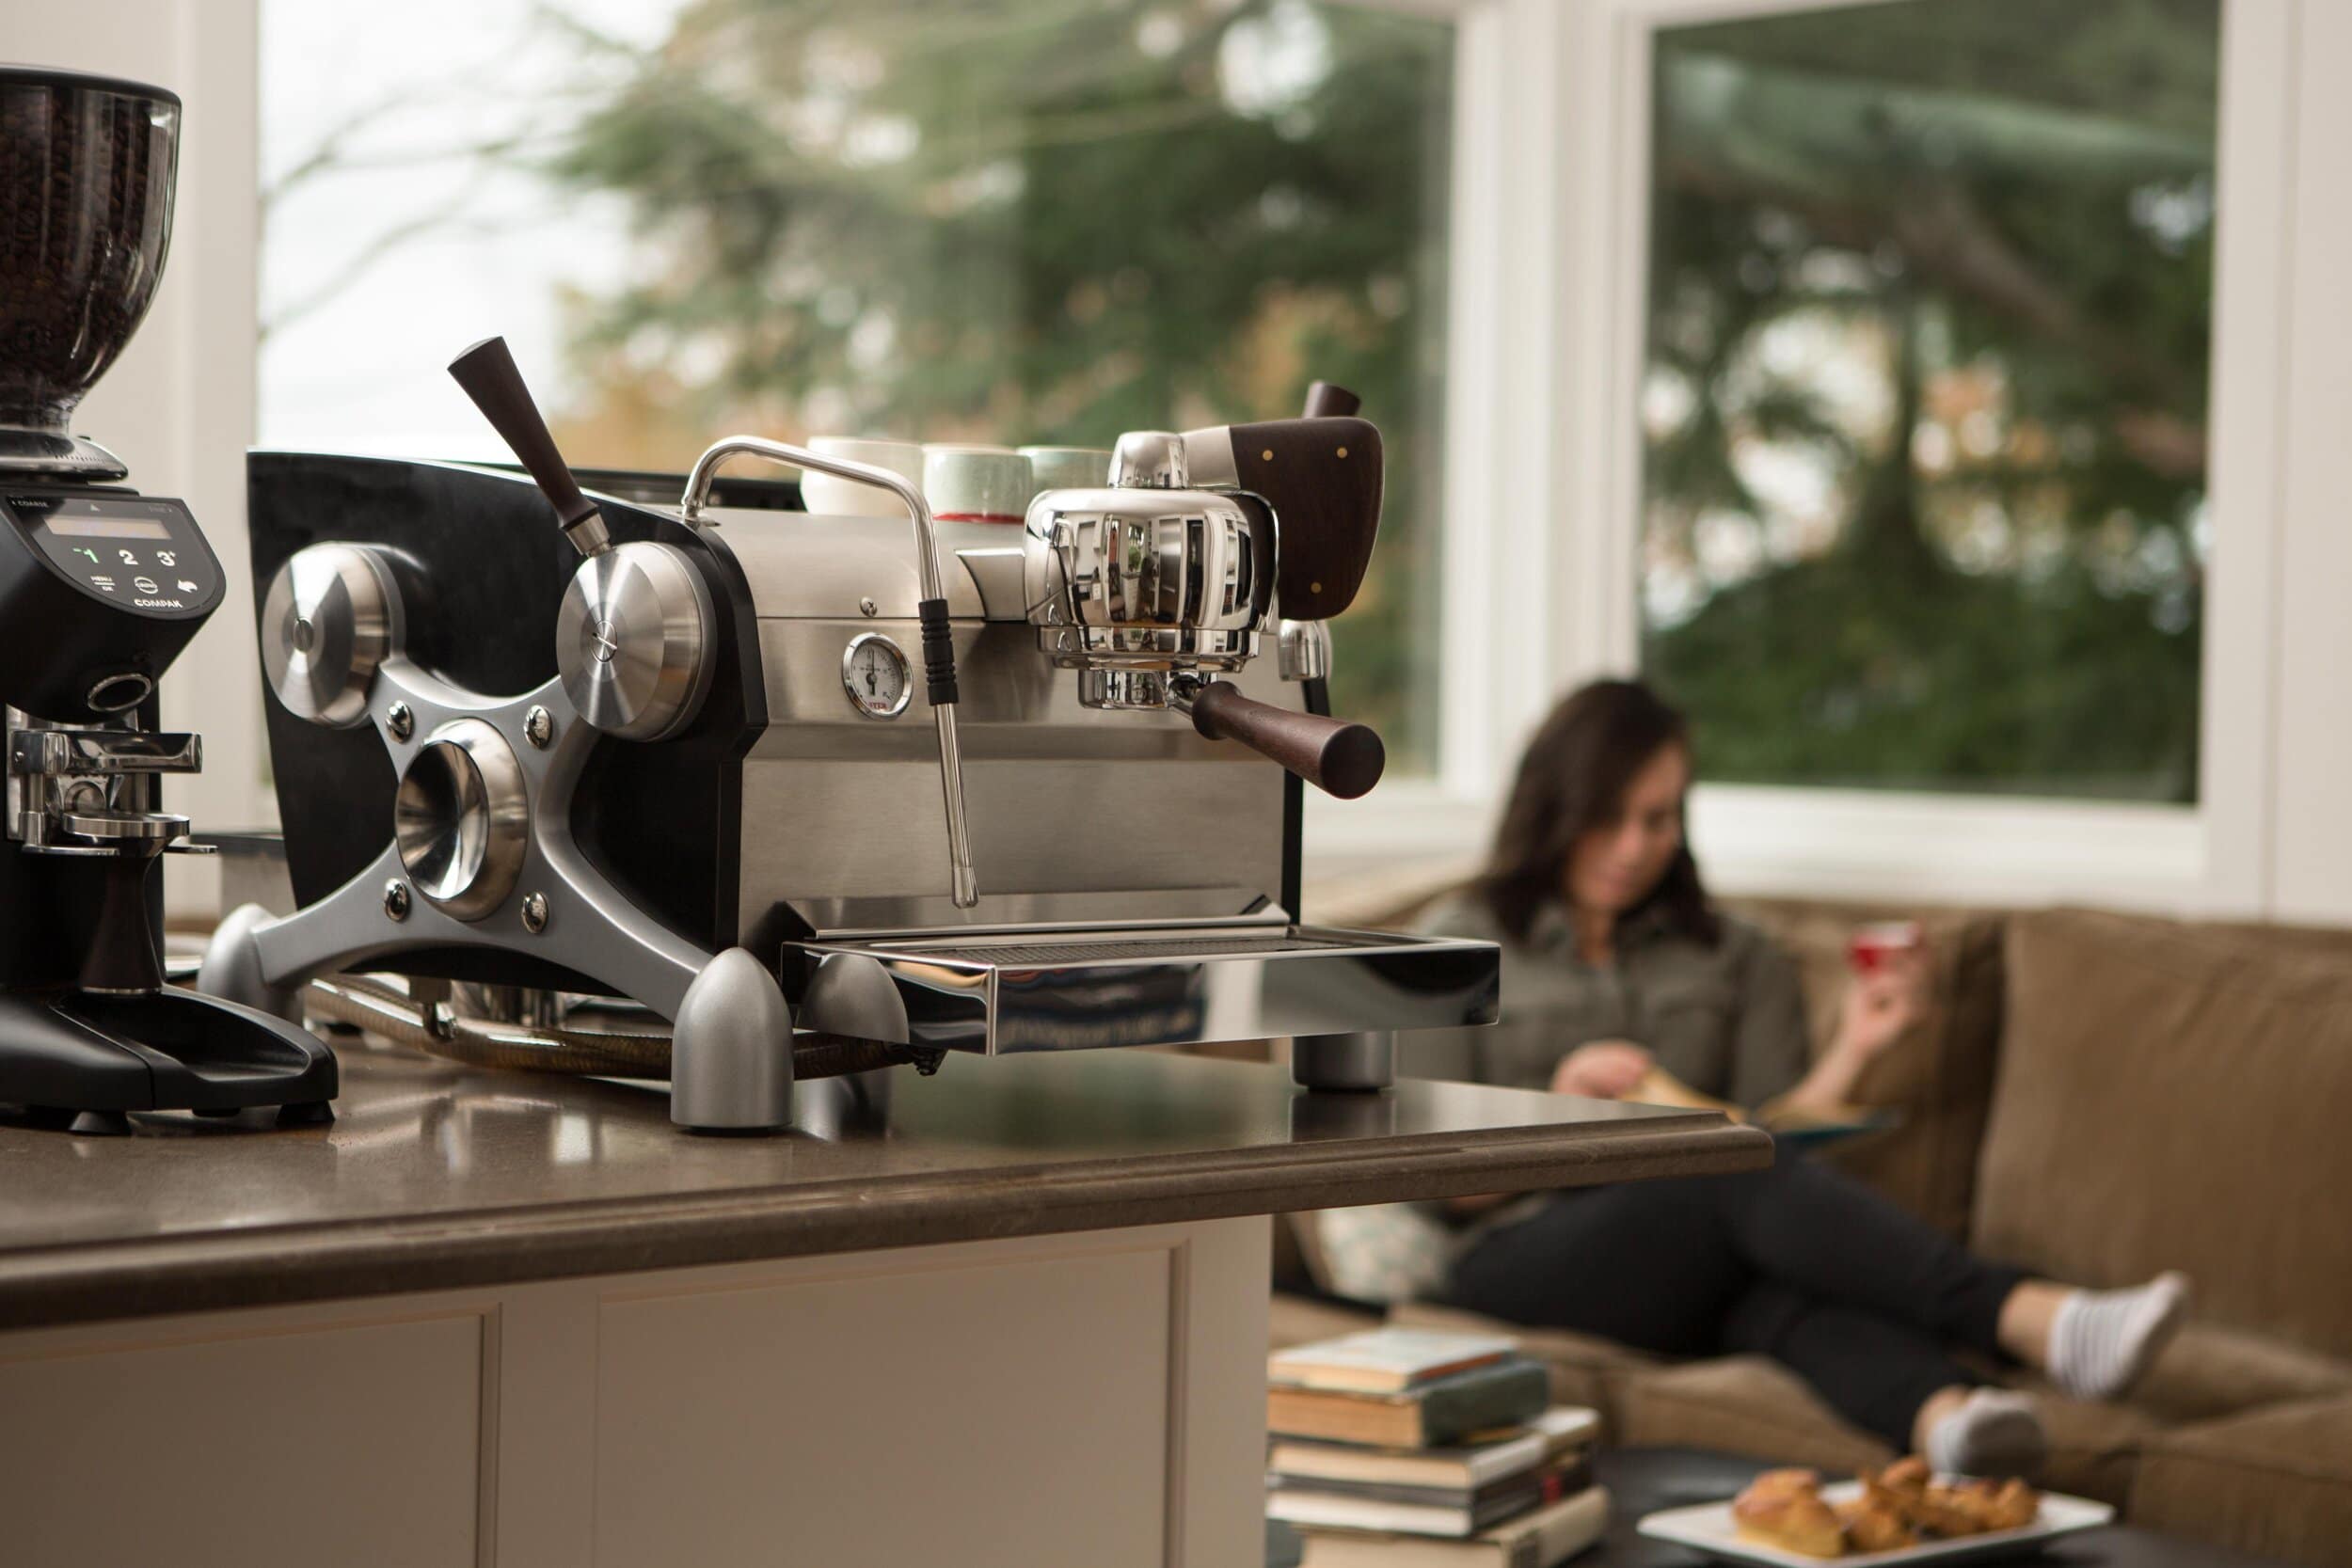 Slayer Espresso Machine Review - Is It Really Worth the Price Tag?